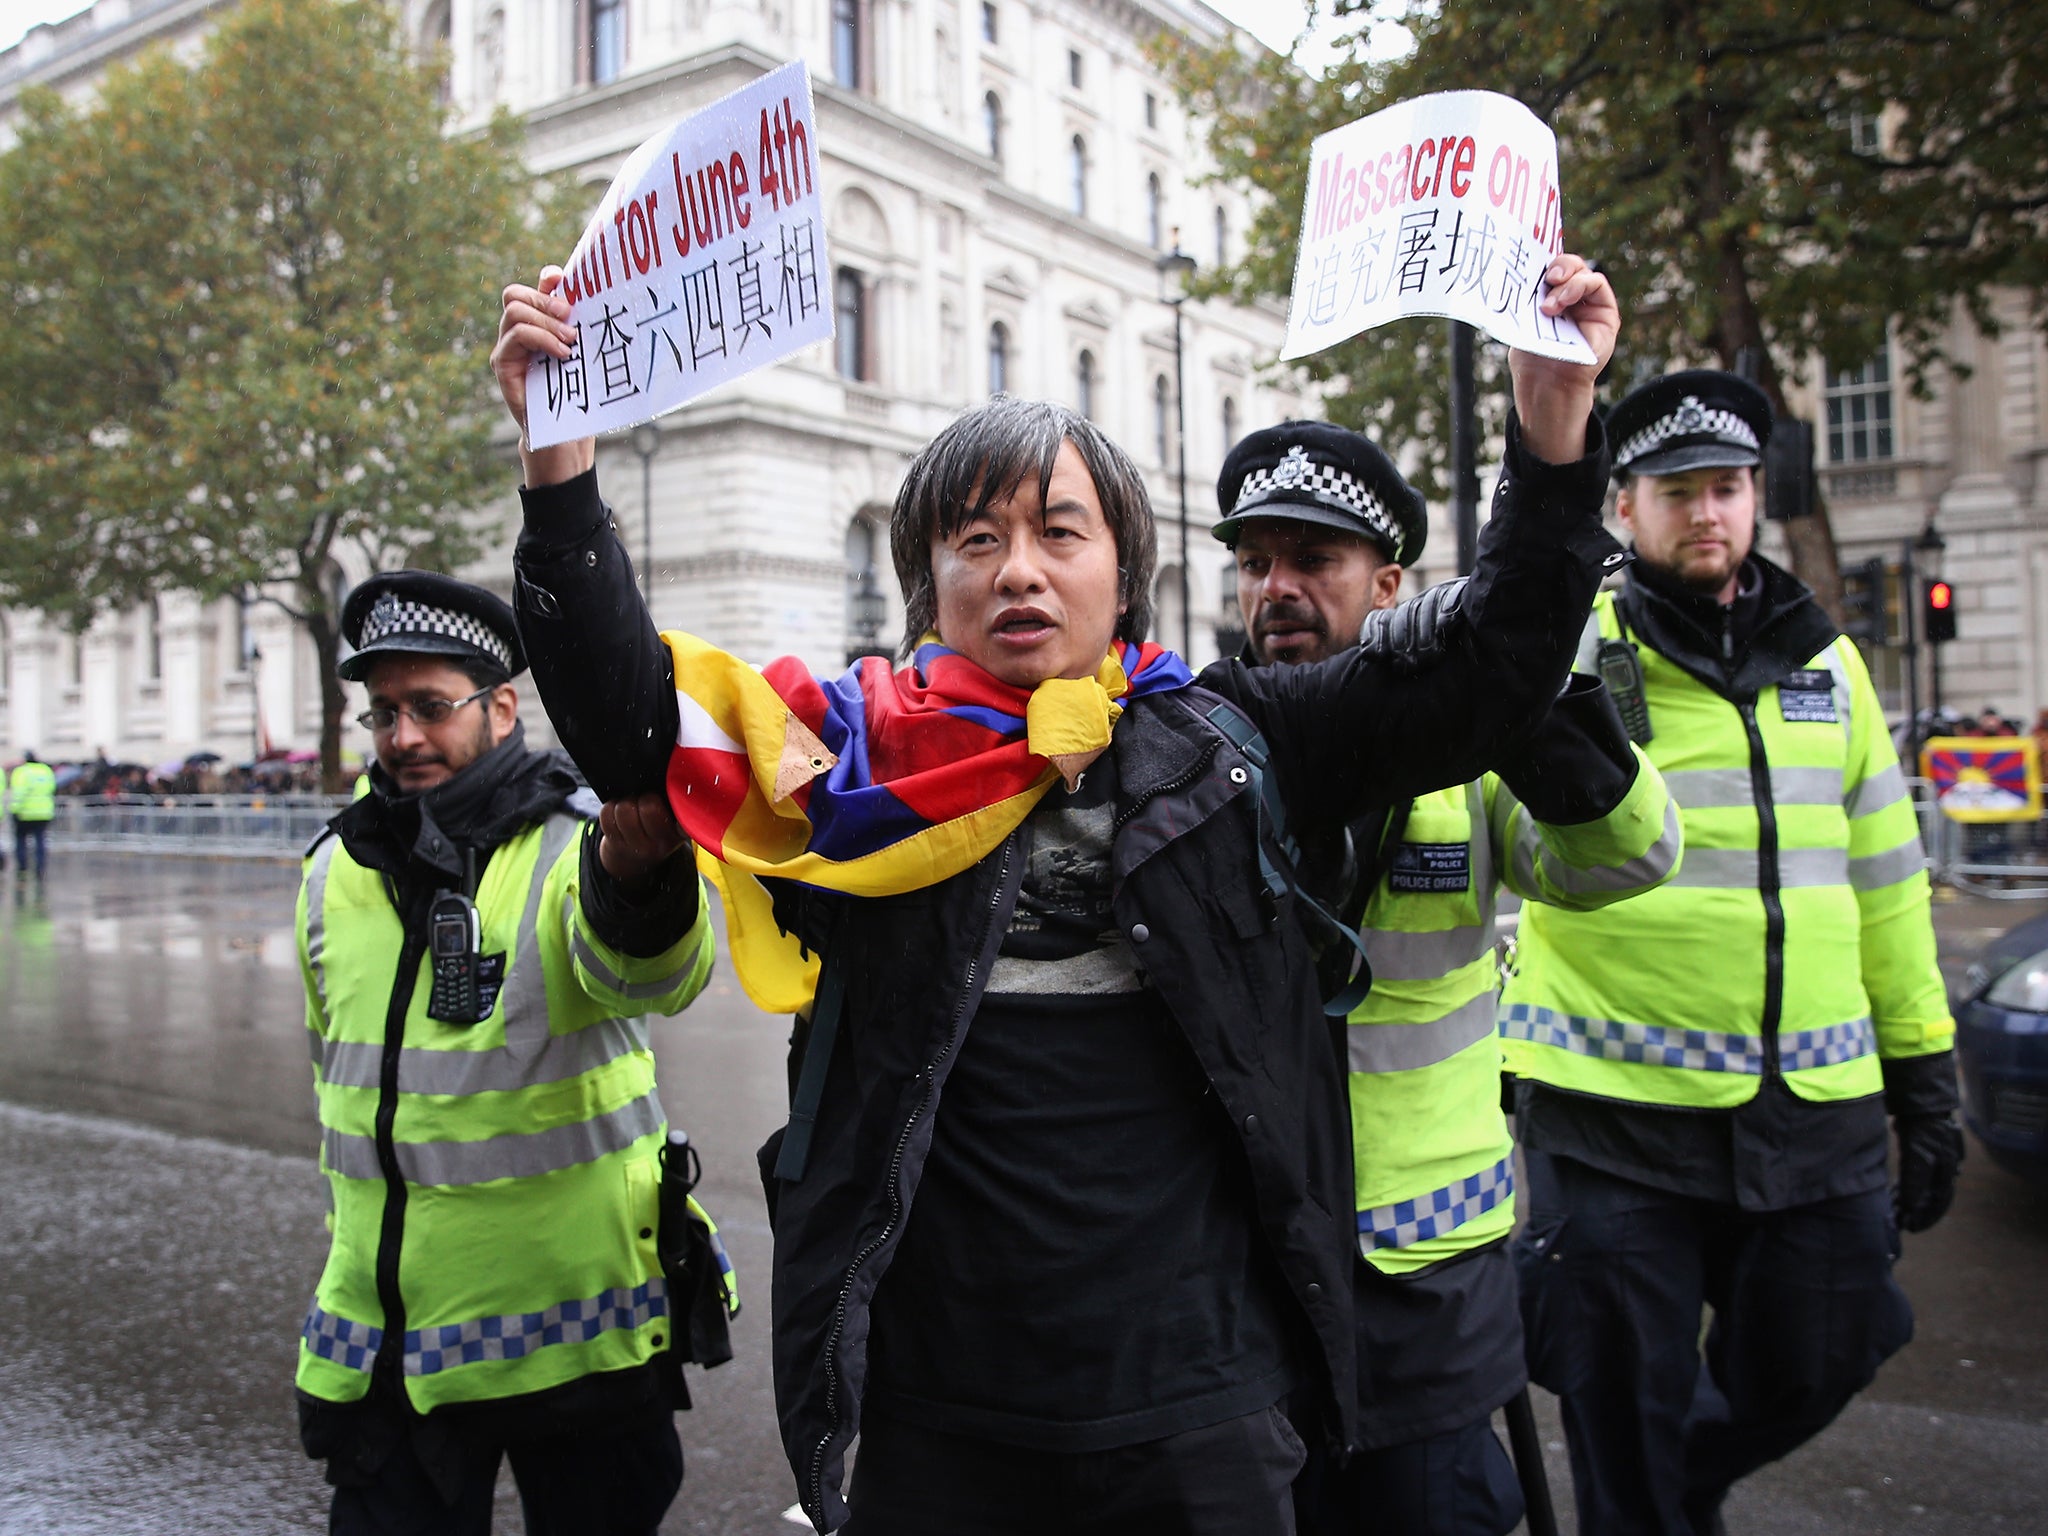 My husband, Tiananmen Square survivor Shao Jiang, was arrested for holding up banners on a London street during the 2015 Chinese state visit